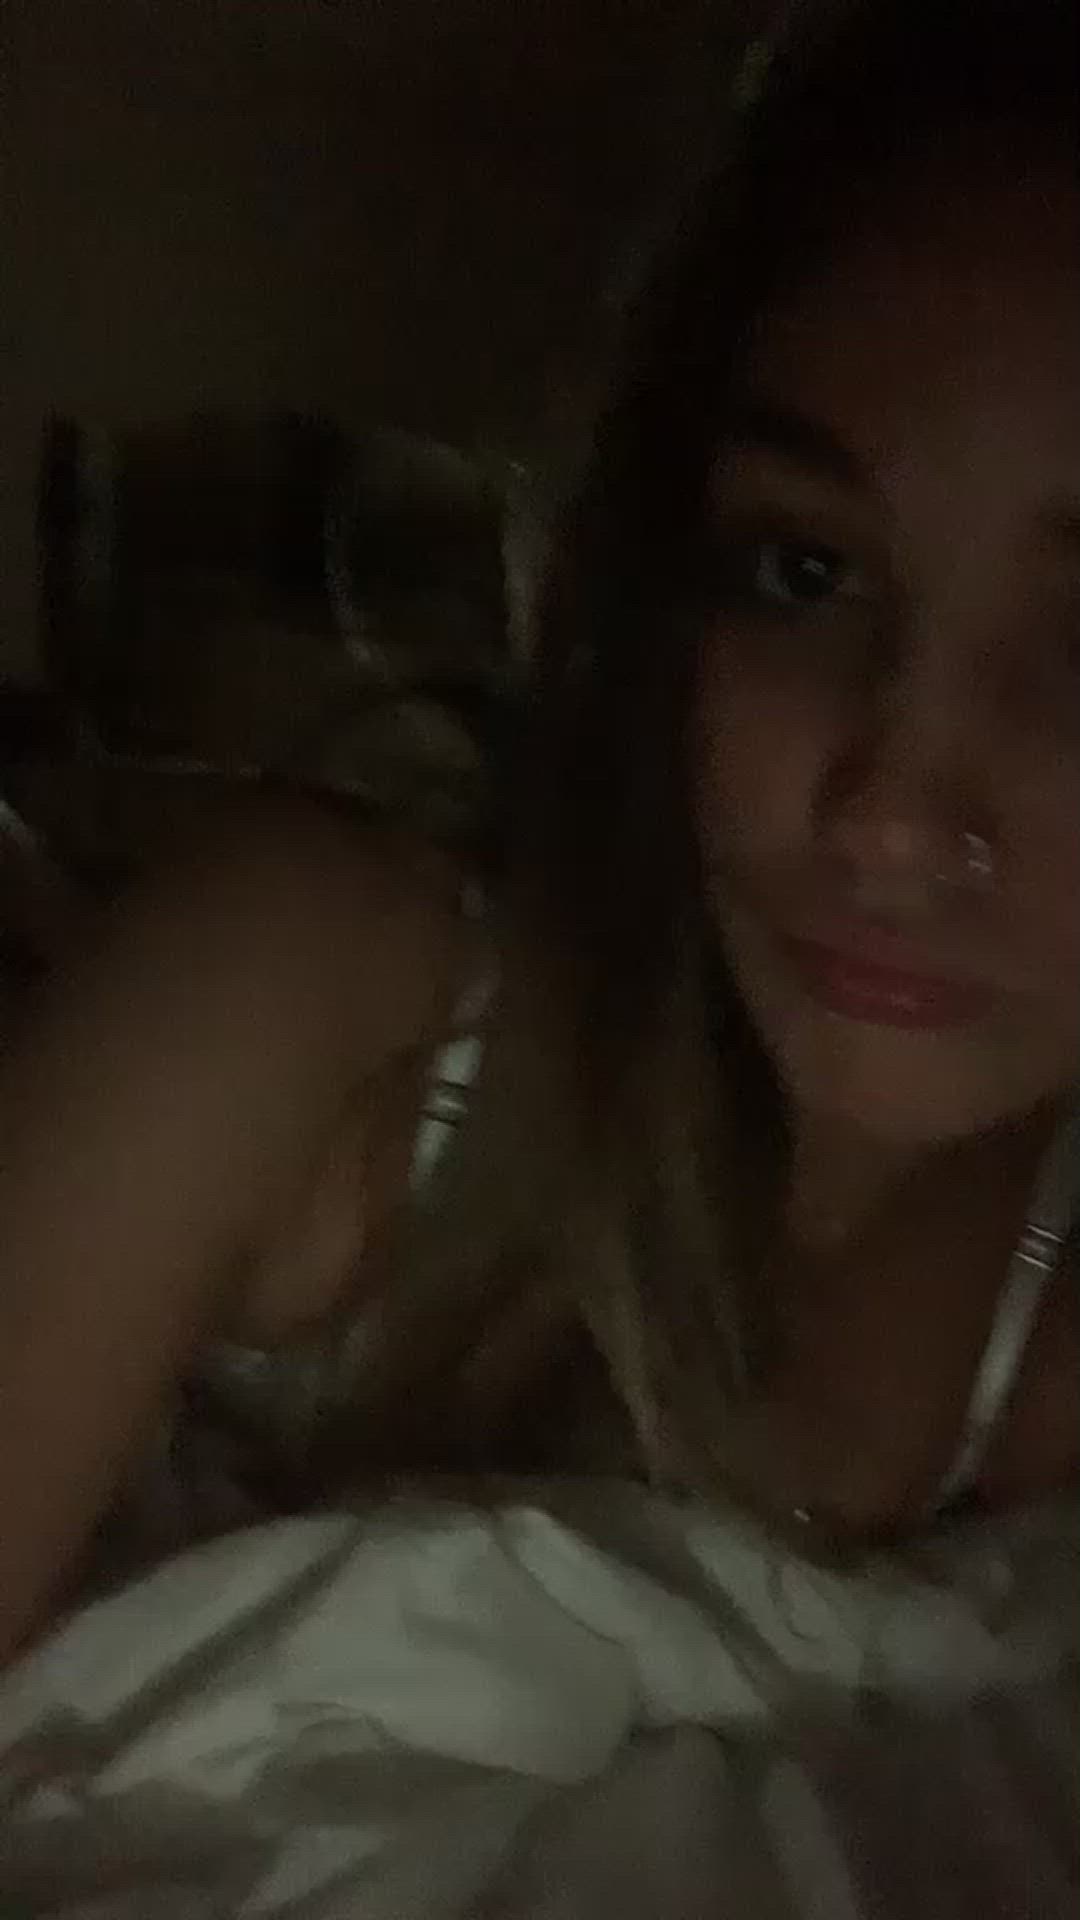 Amateur porn video with onlyfans model roxyrides <strong>@roxy.rides</strong>